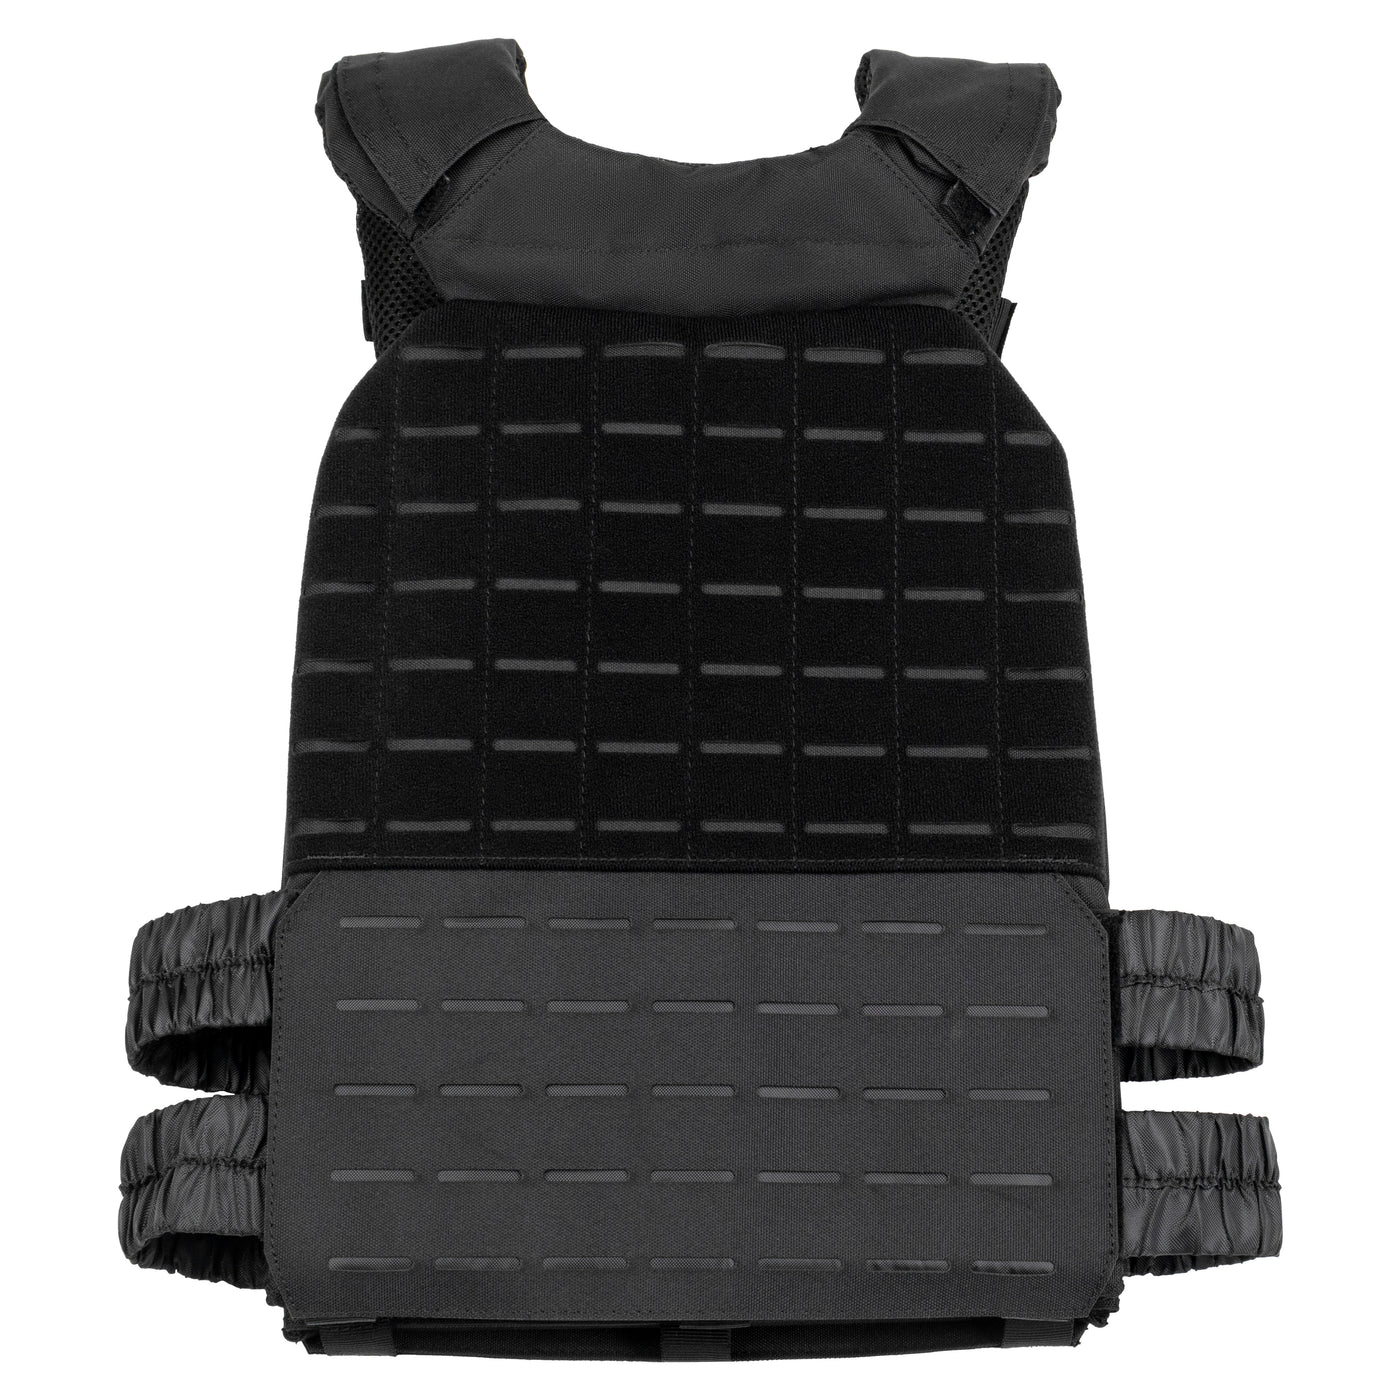 Weighted Vest Plate Carrier – Wolf Tactical